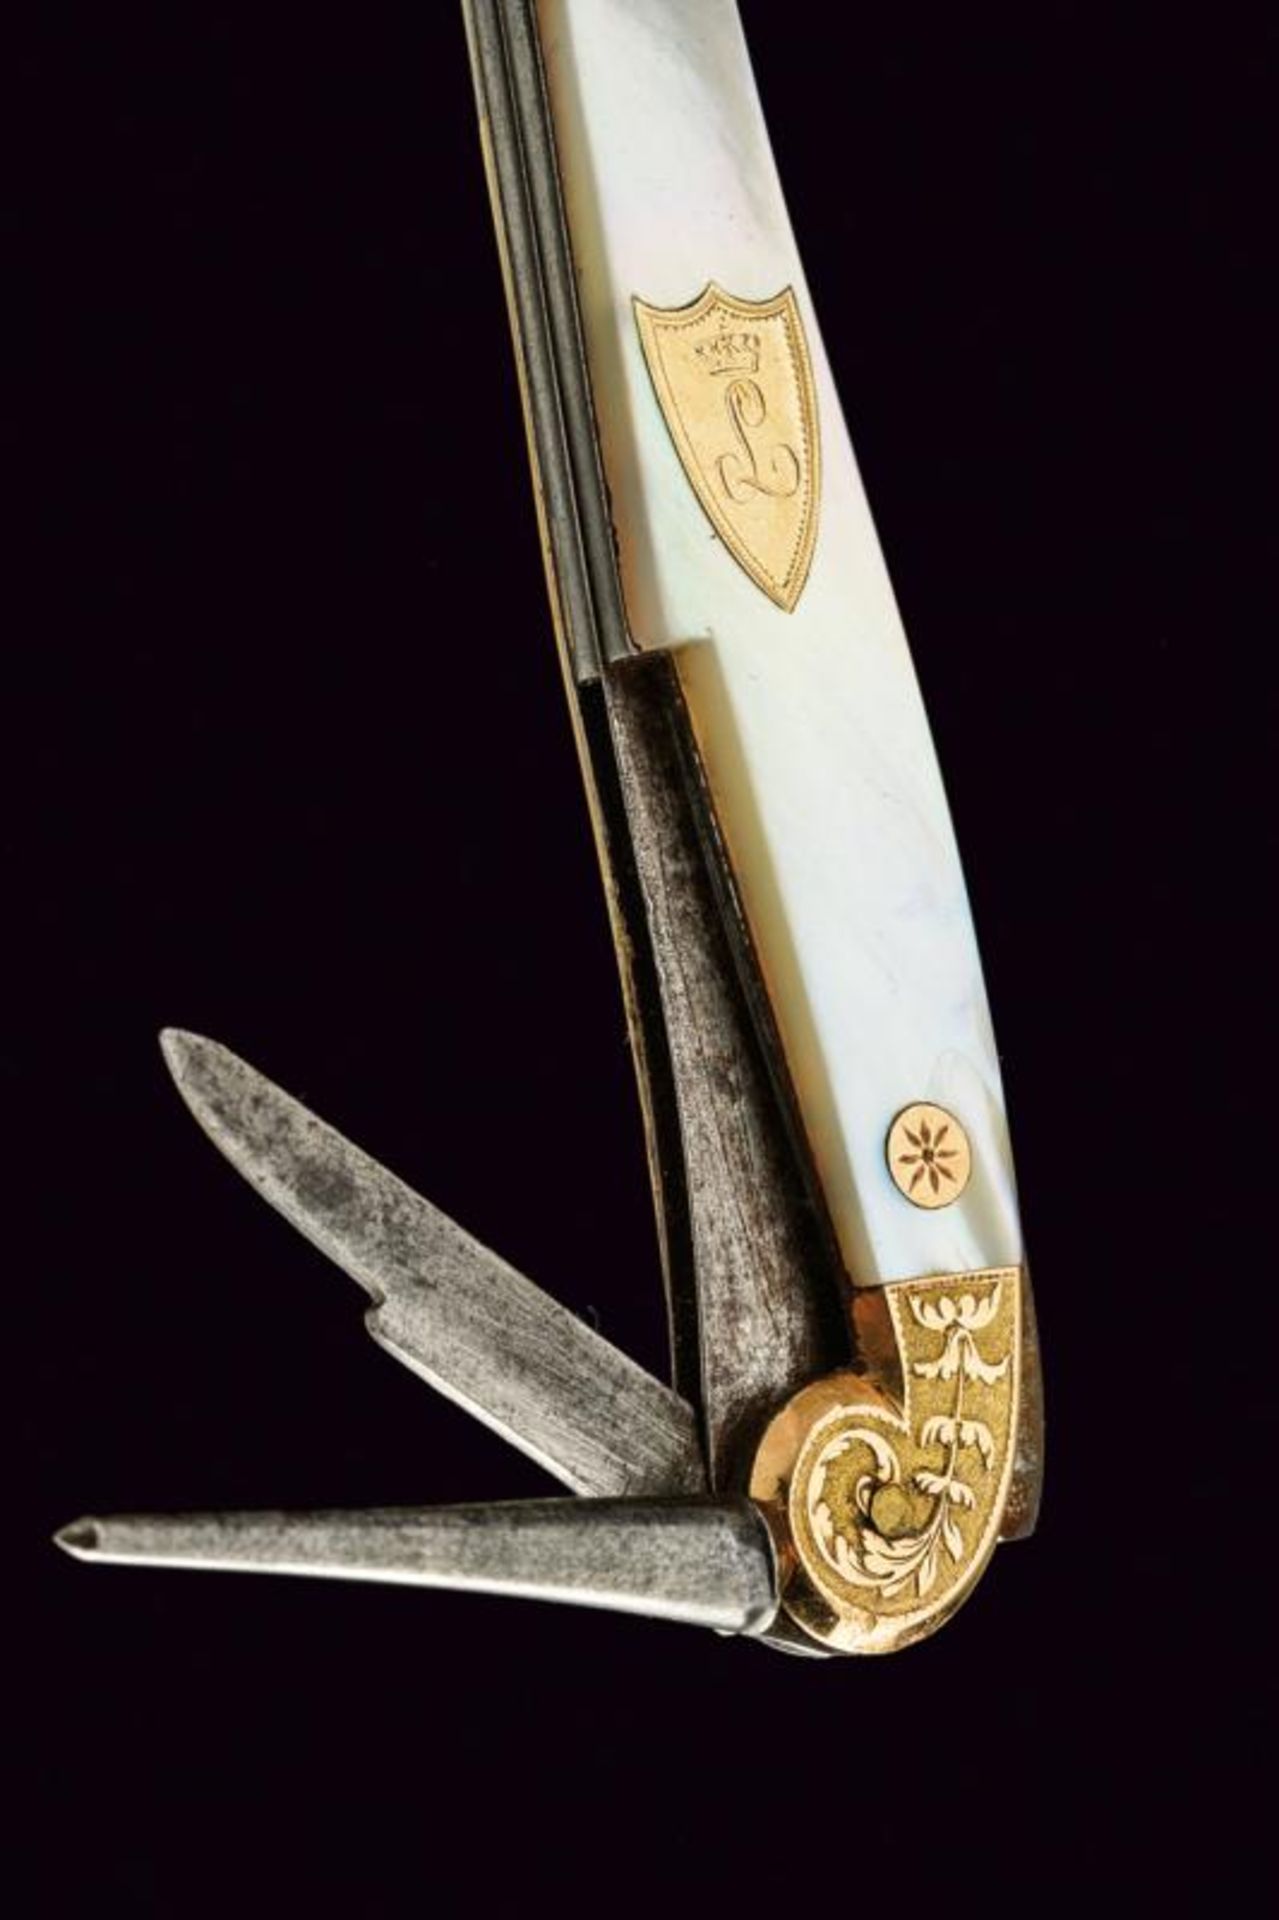 A gold mounted pocket knife of noble property - Image 2 of 3